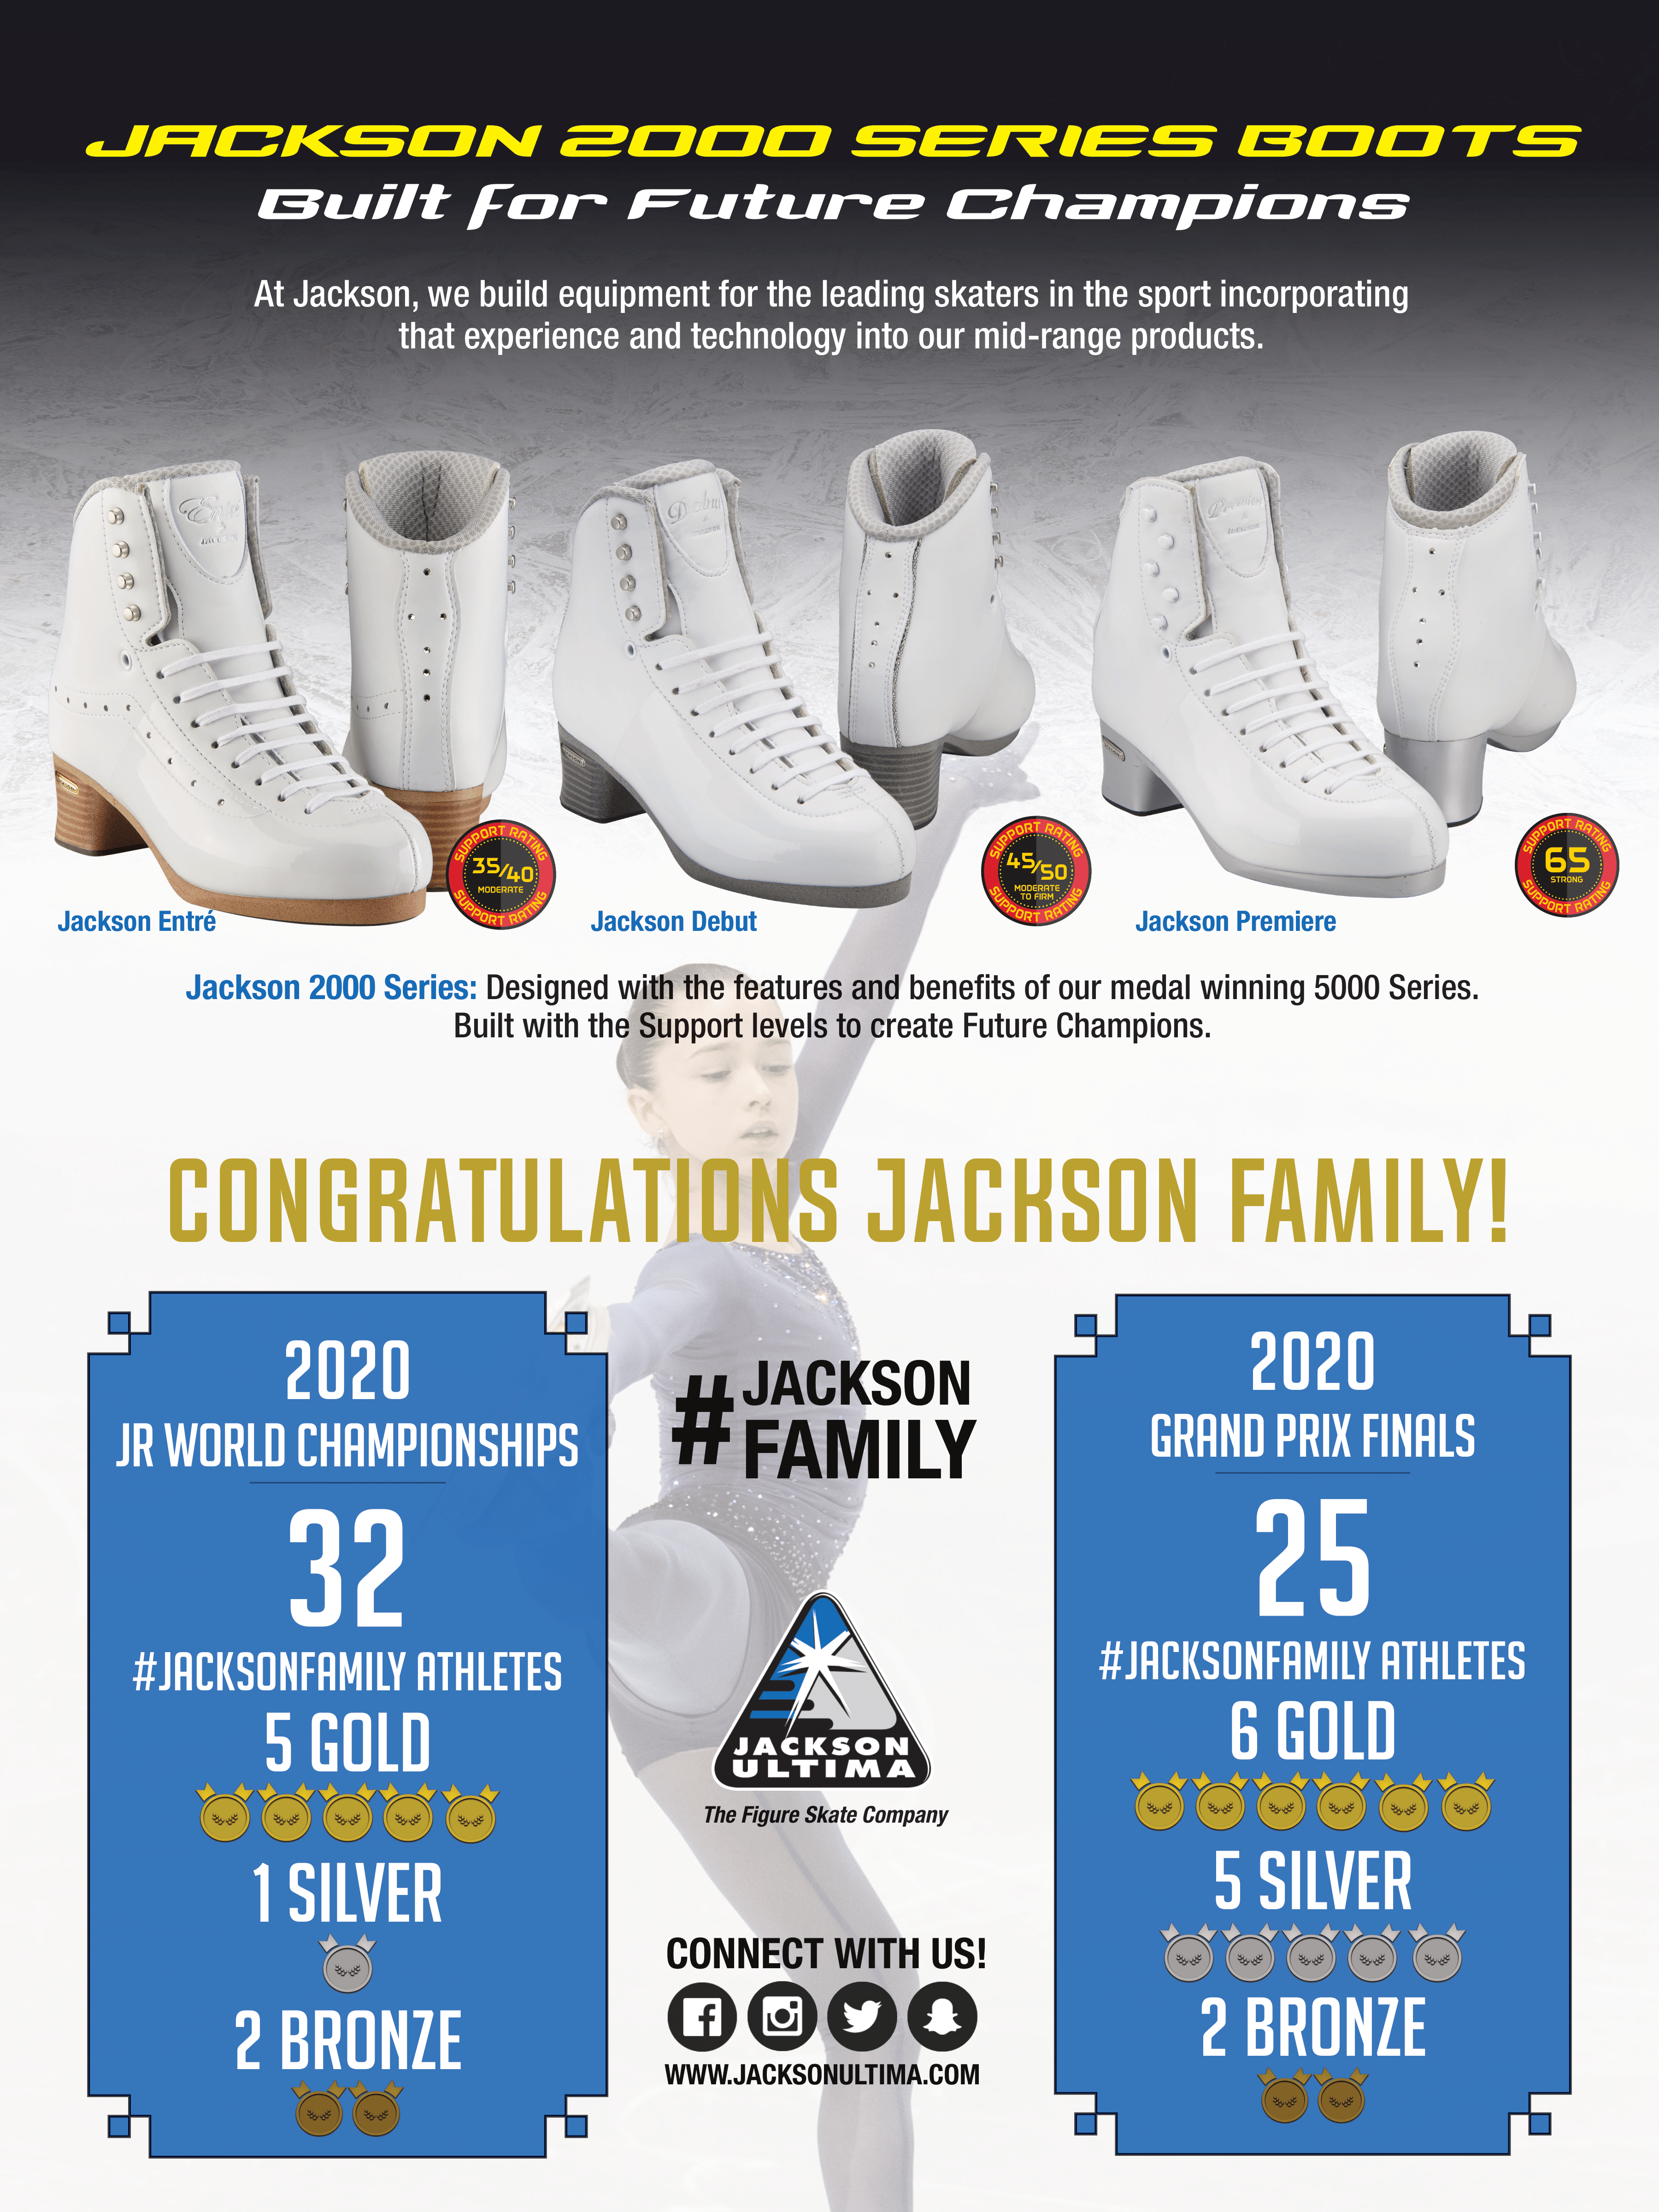 Jackson 2000 Series Boots Results Poster